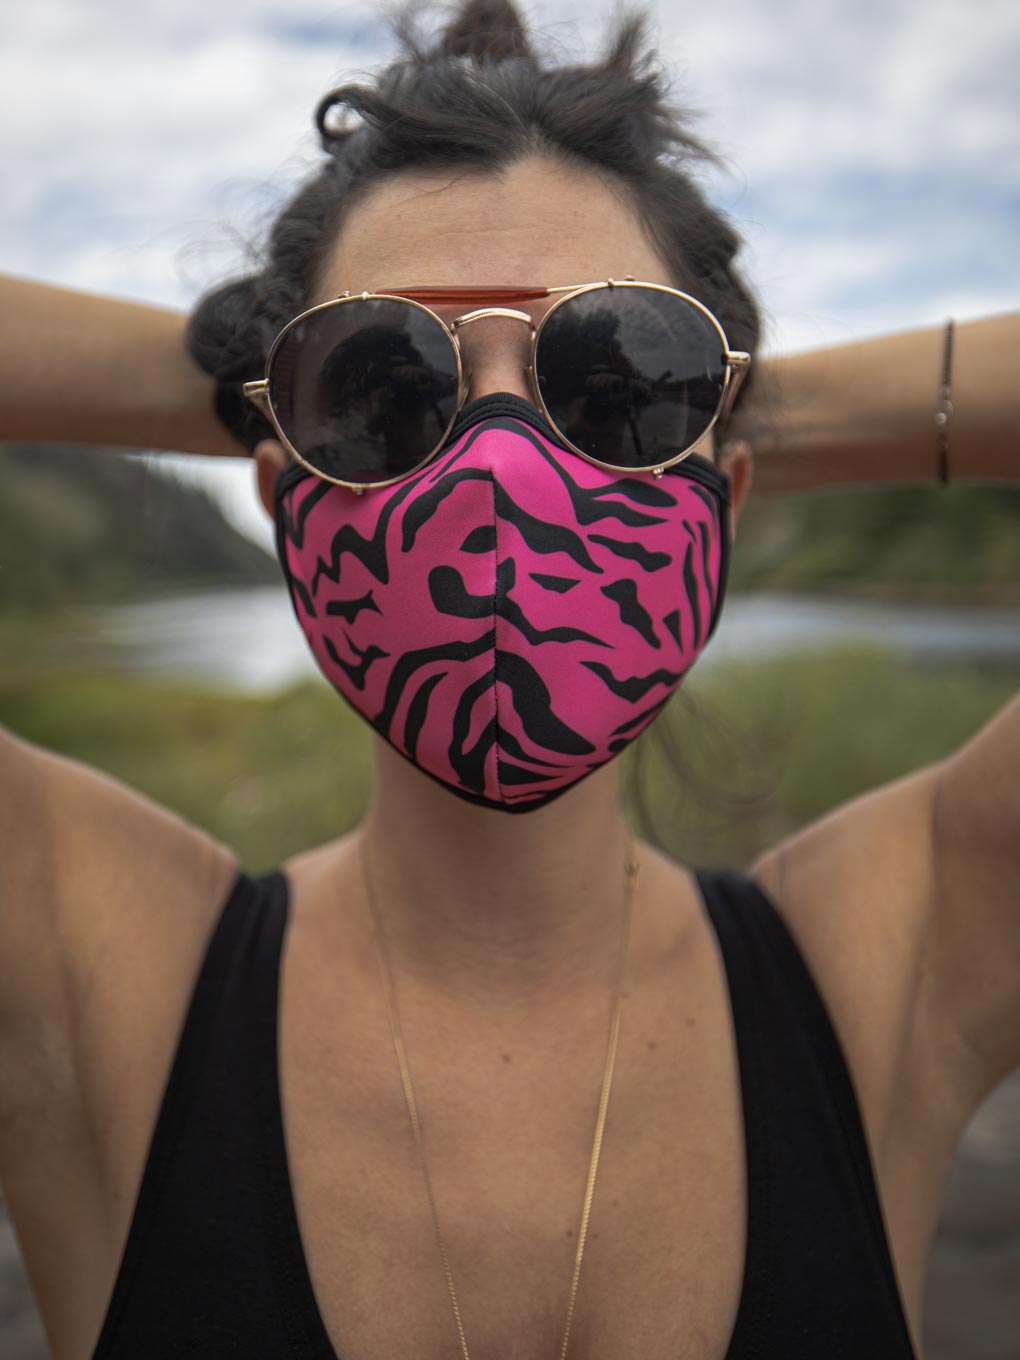 Neon Pink Zebra Copper-Threaded Face Mask on Woman